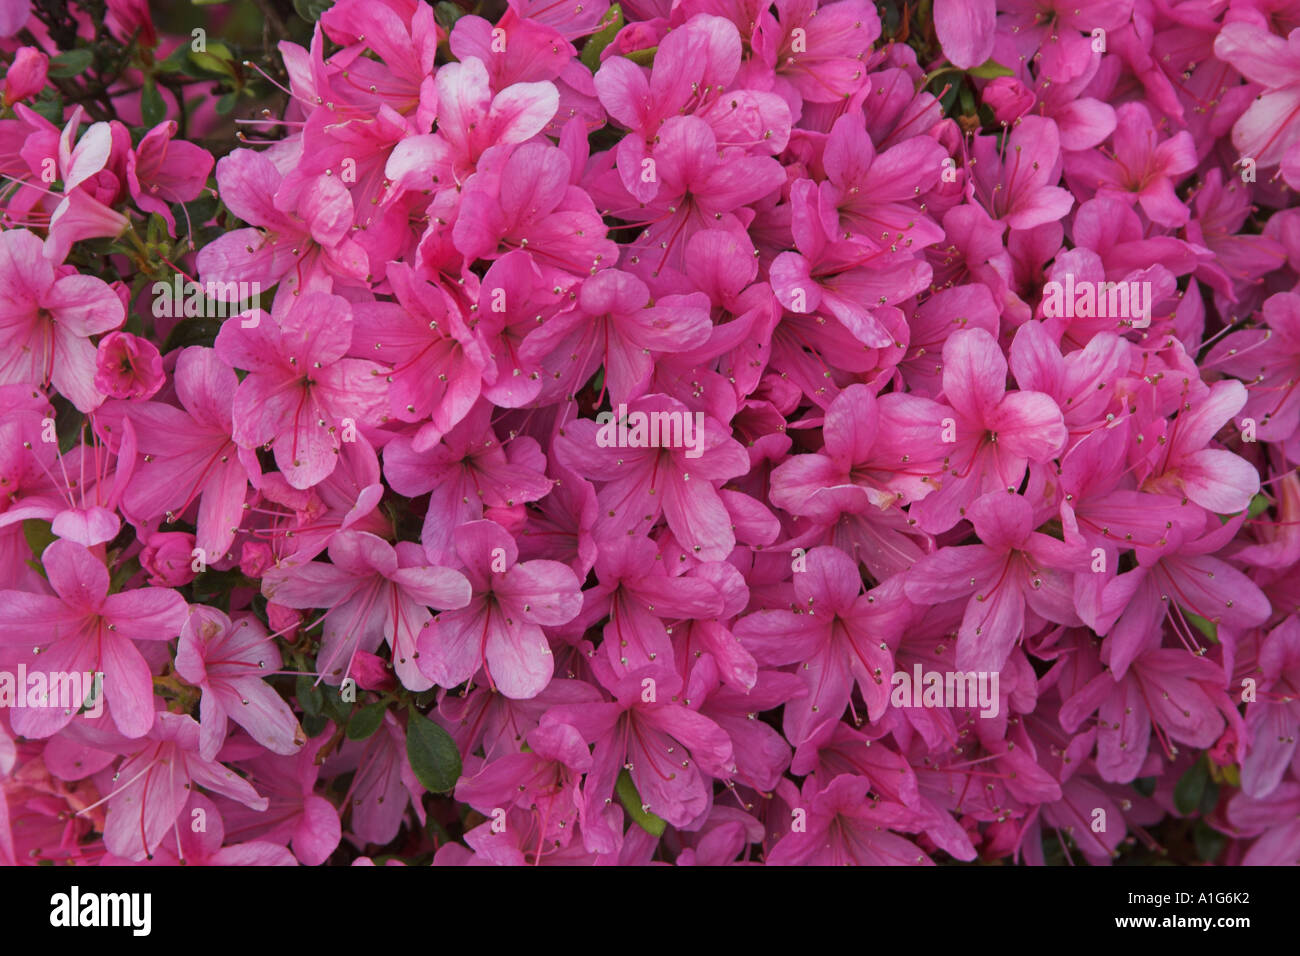 Rhododendron flowers Stock Photo